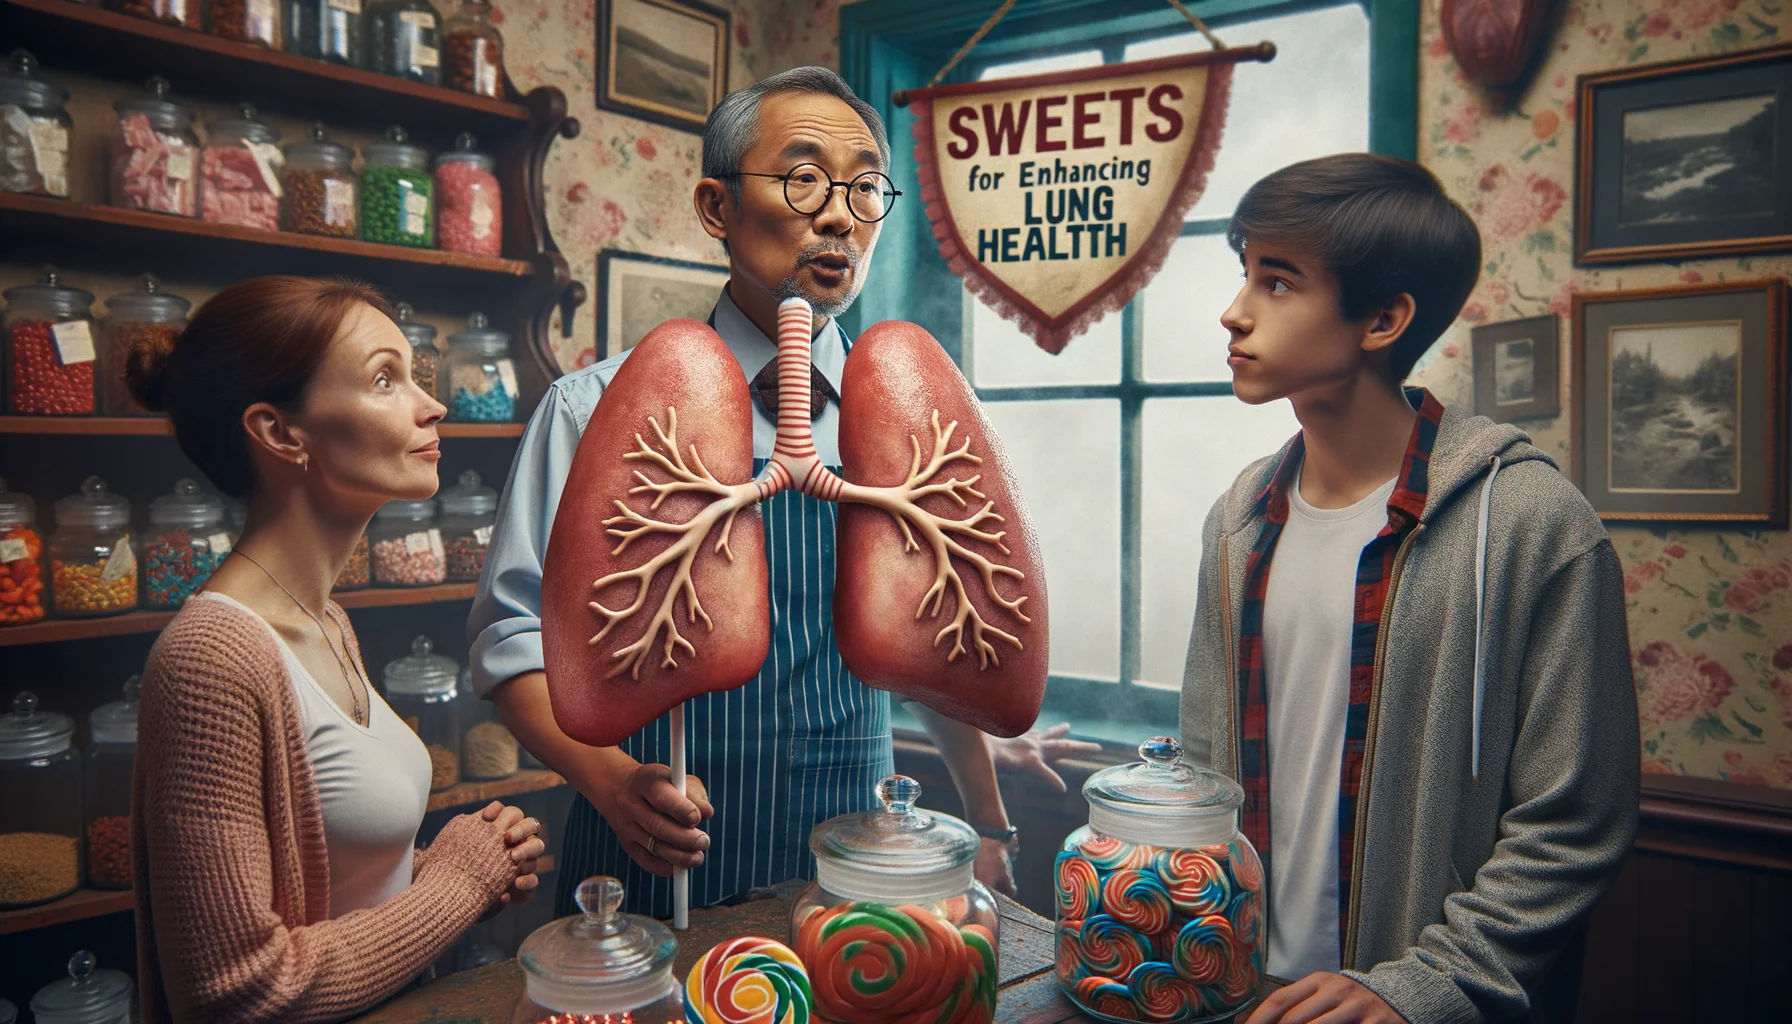 Create a humorous yet realistic image interpreting 'Sweets for Enhancing Lung Health'. Imagine a scene set in a rustic old-fashioned candy shop. The shopkeeper, a middle-aged Asian man with spectacles, is presenting a large lollipop fashioned to resemble a pair of healthy, vibrant lungs. A Caucasian female customer in her 30s, looking visibly amused, is holding the lollipop while her teenage Hispanic son, with a look of wonderment, is inspecting the candy. The walls are lined with jars of colorful confections, and a bold vintage sign proclaims 'Sweets for Lung Health'.